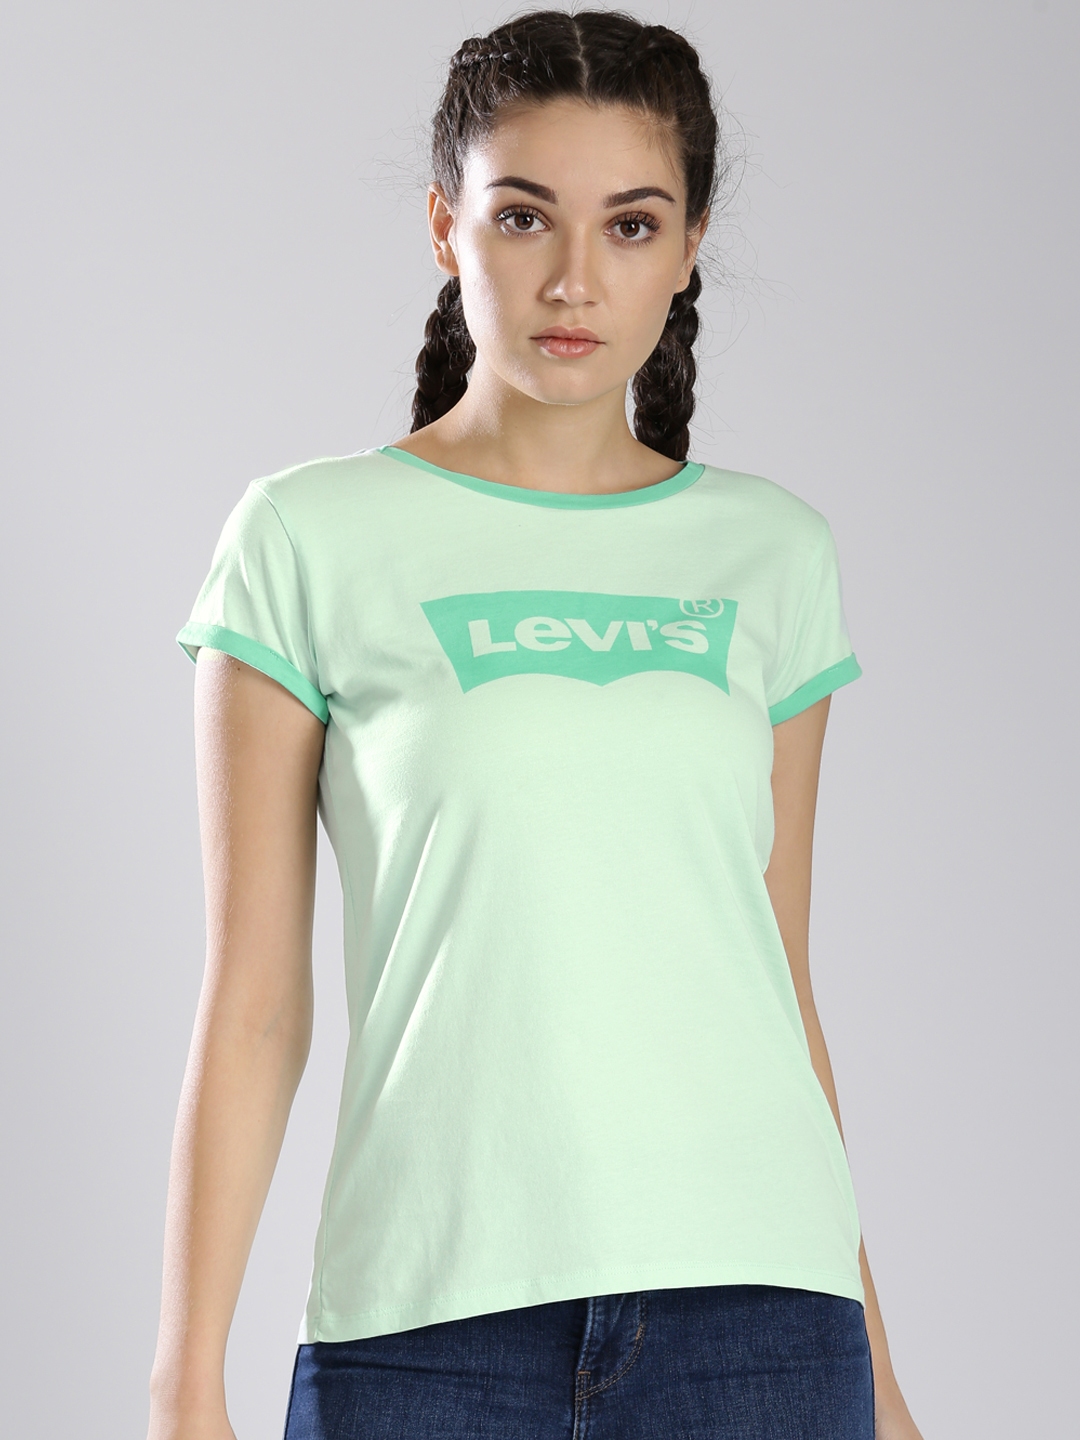 Buy Levis Women Green Printed Round Neck Pure Cotton T Shirt - Tshirts ...